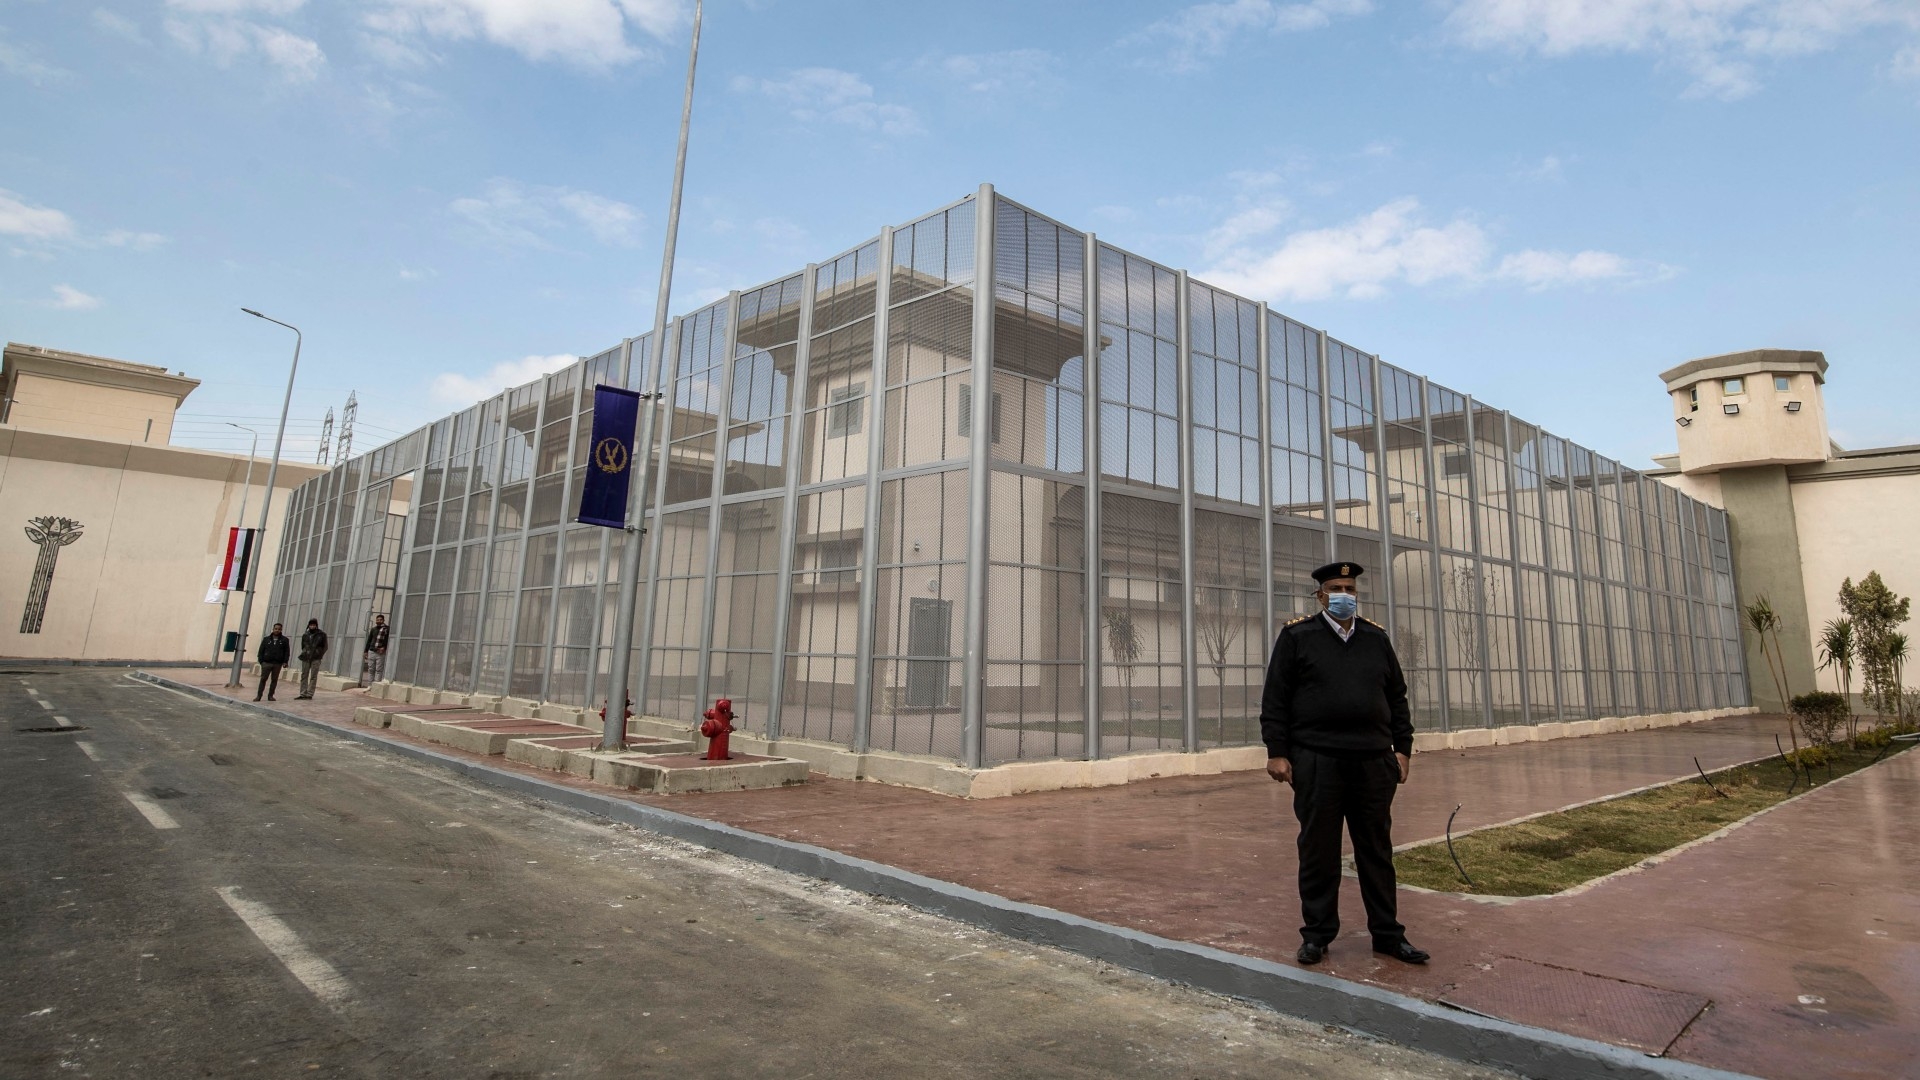 A picture taken on 16 January 2022 shows a prison in Egypt's Badr city, 65 kms east of capital Cairo (AFP/File photo)